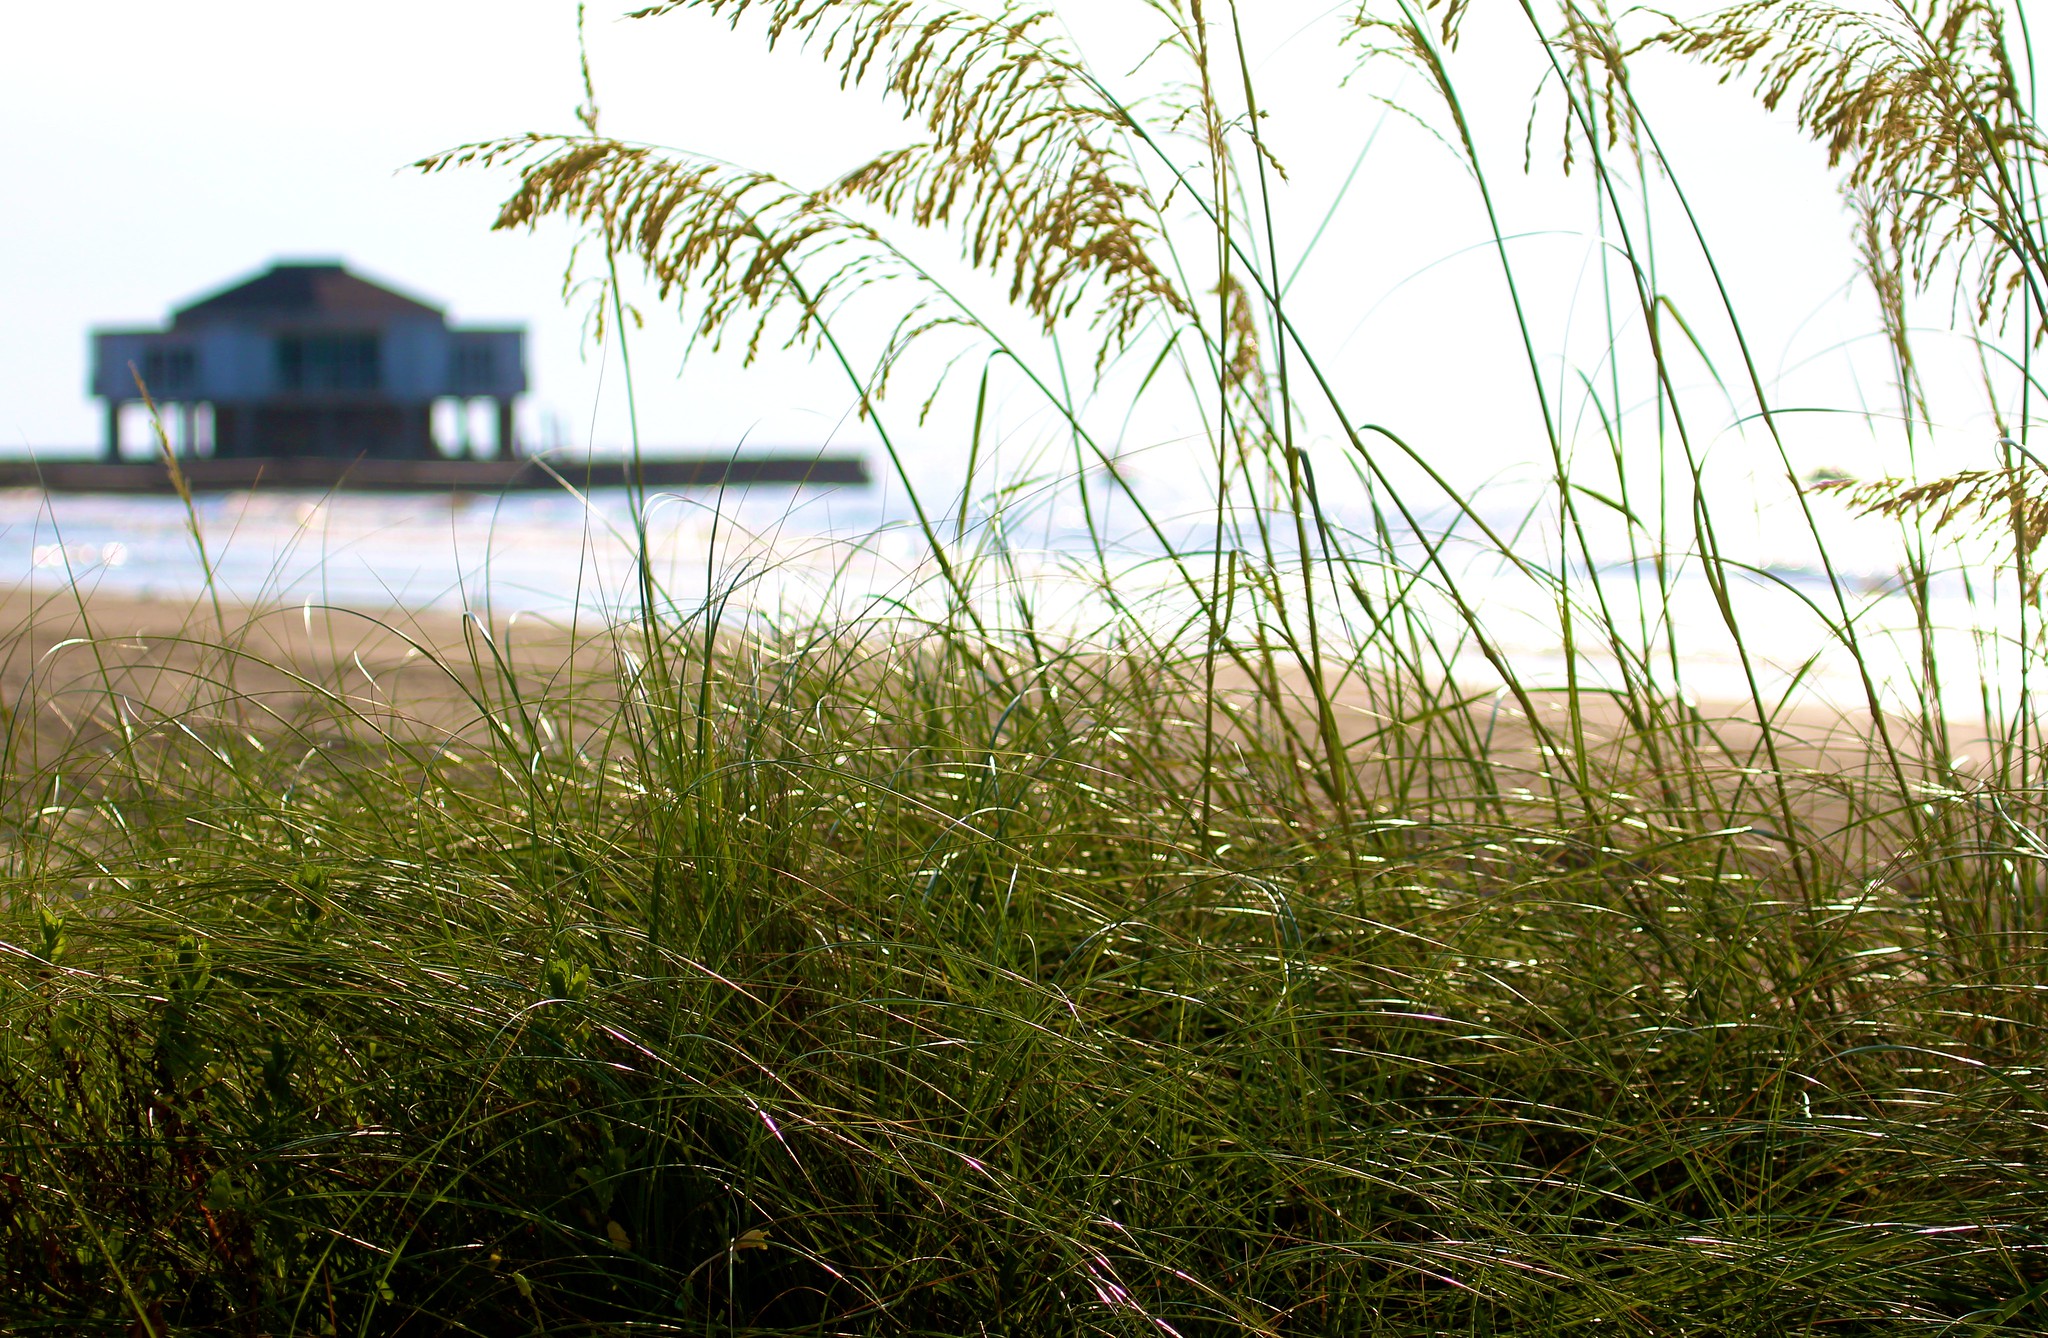 Dune grasses in front, home on stilts behind